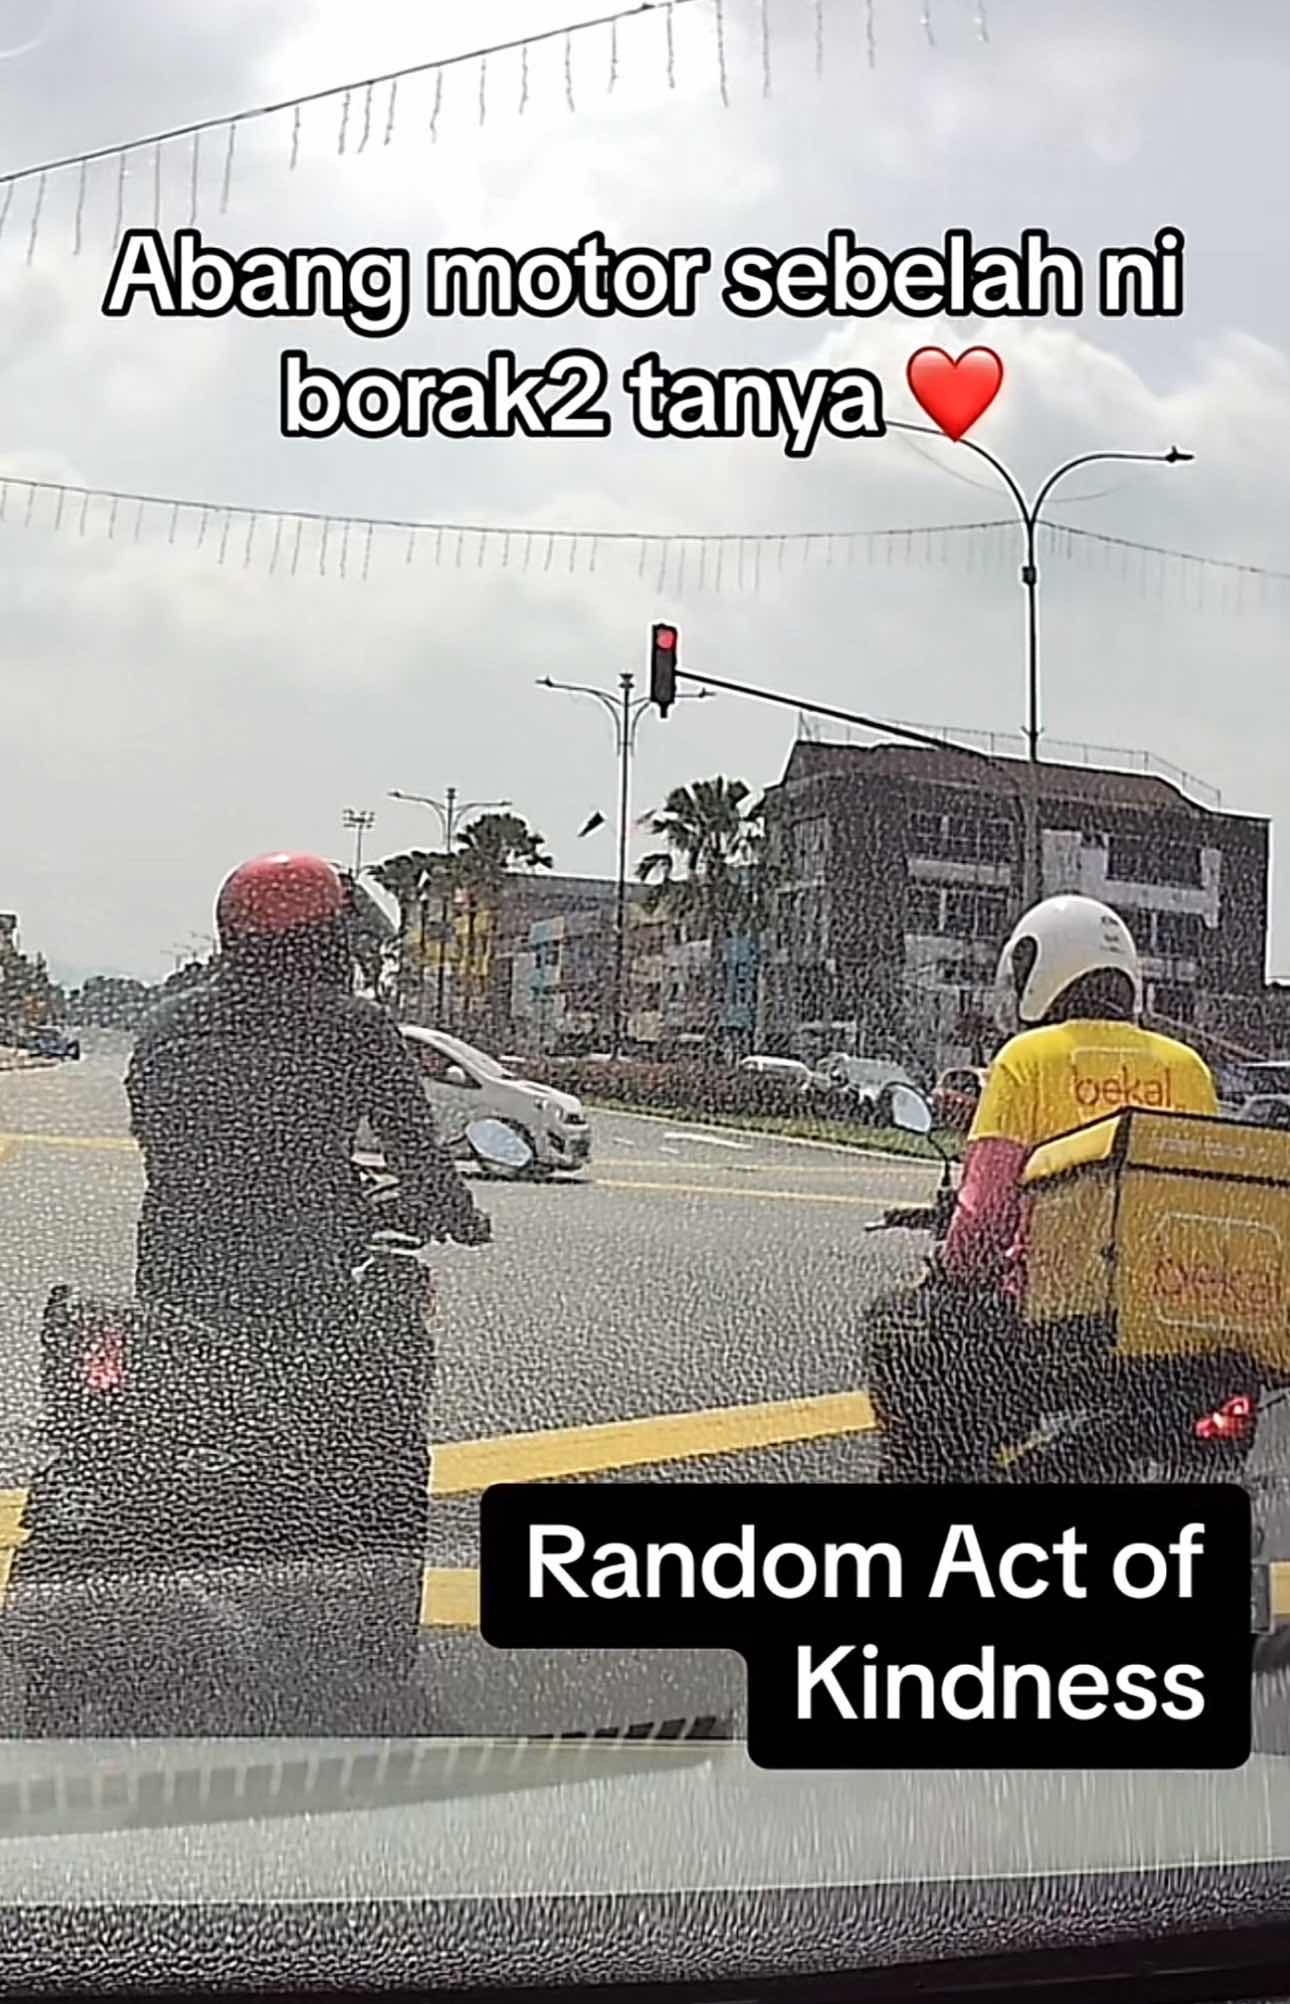 Kind m'sian gifts cash to p-hailing rider's kid, netizens touched | weirdkaya